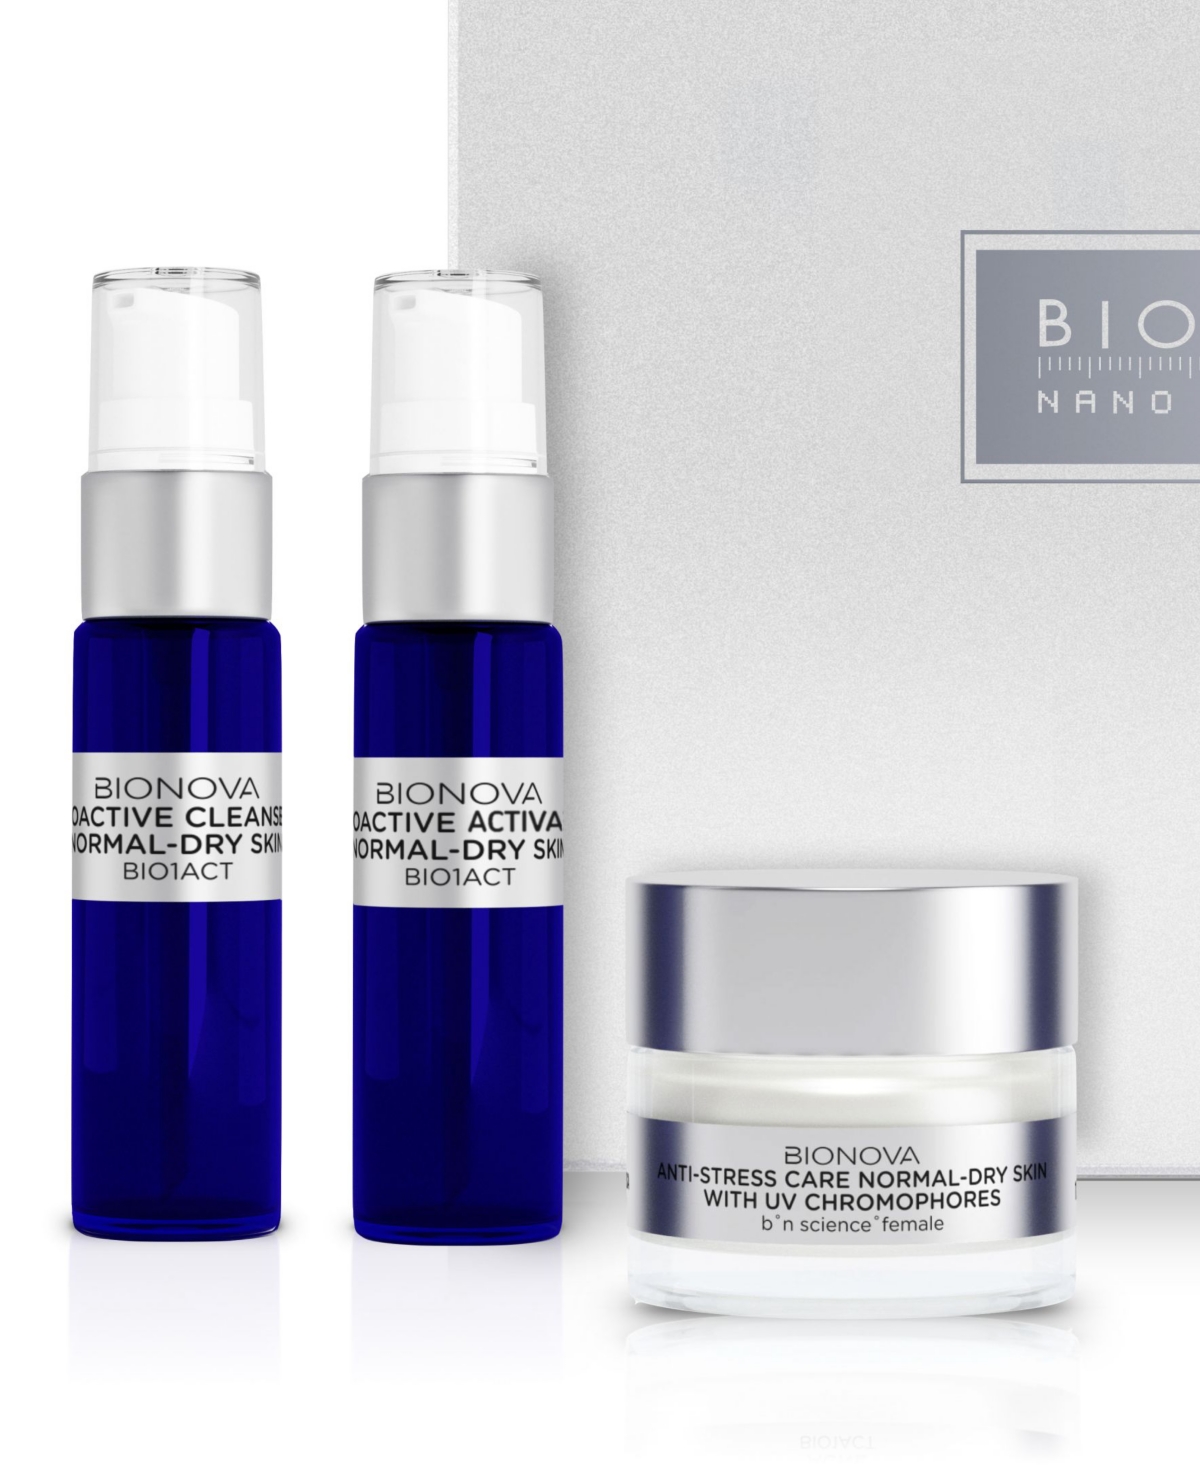 Bionova Anti-Stress Discovery Collection for Normal/Dry Skin with Uv Chromophores